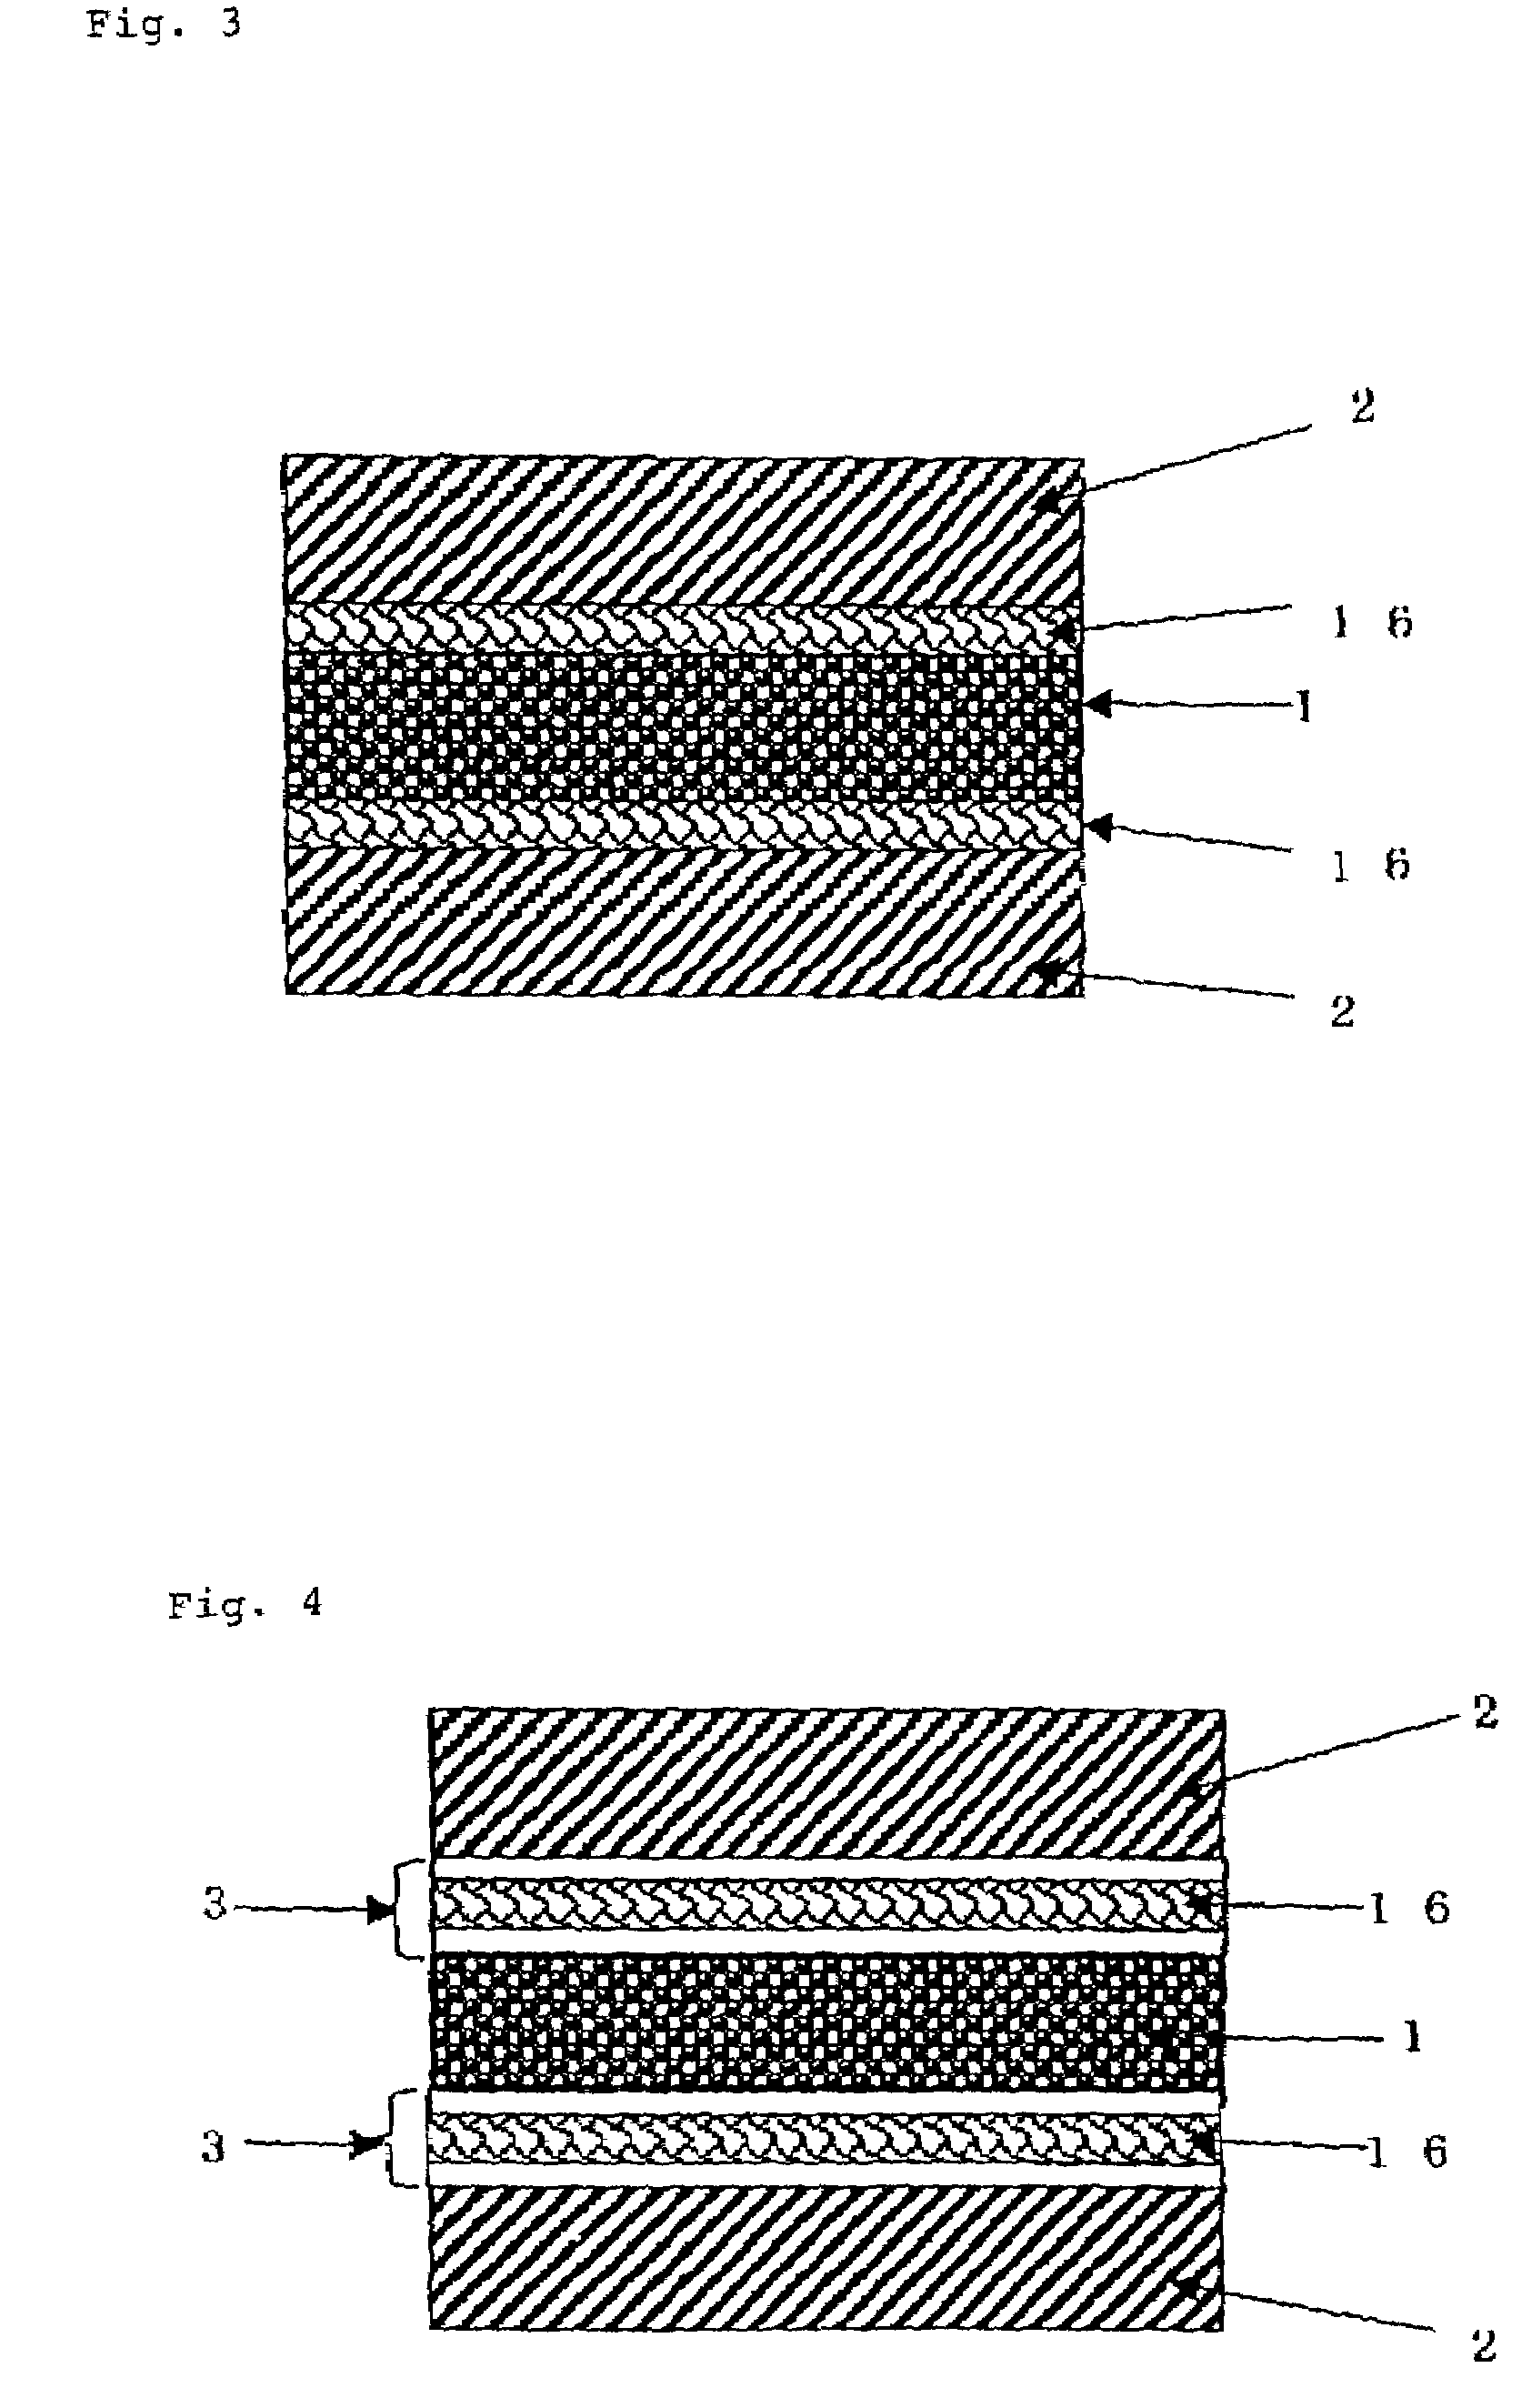 Road reinforcement sheet, structure of asphalt reinforced pavement and method for paving road